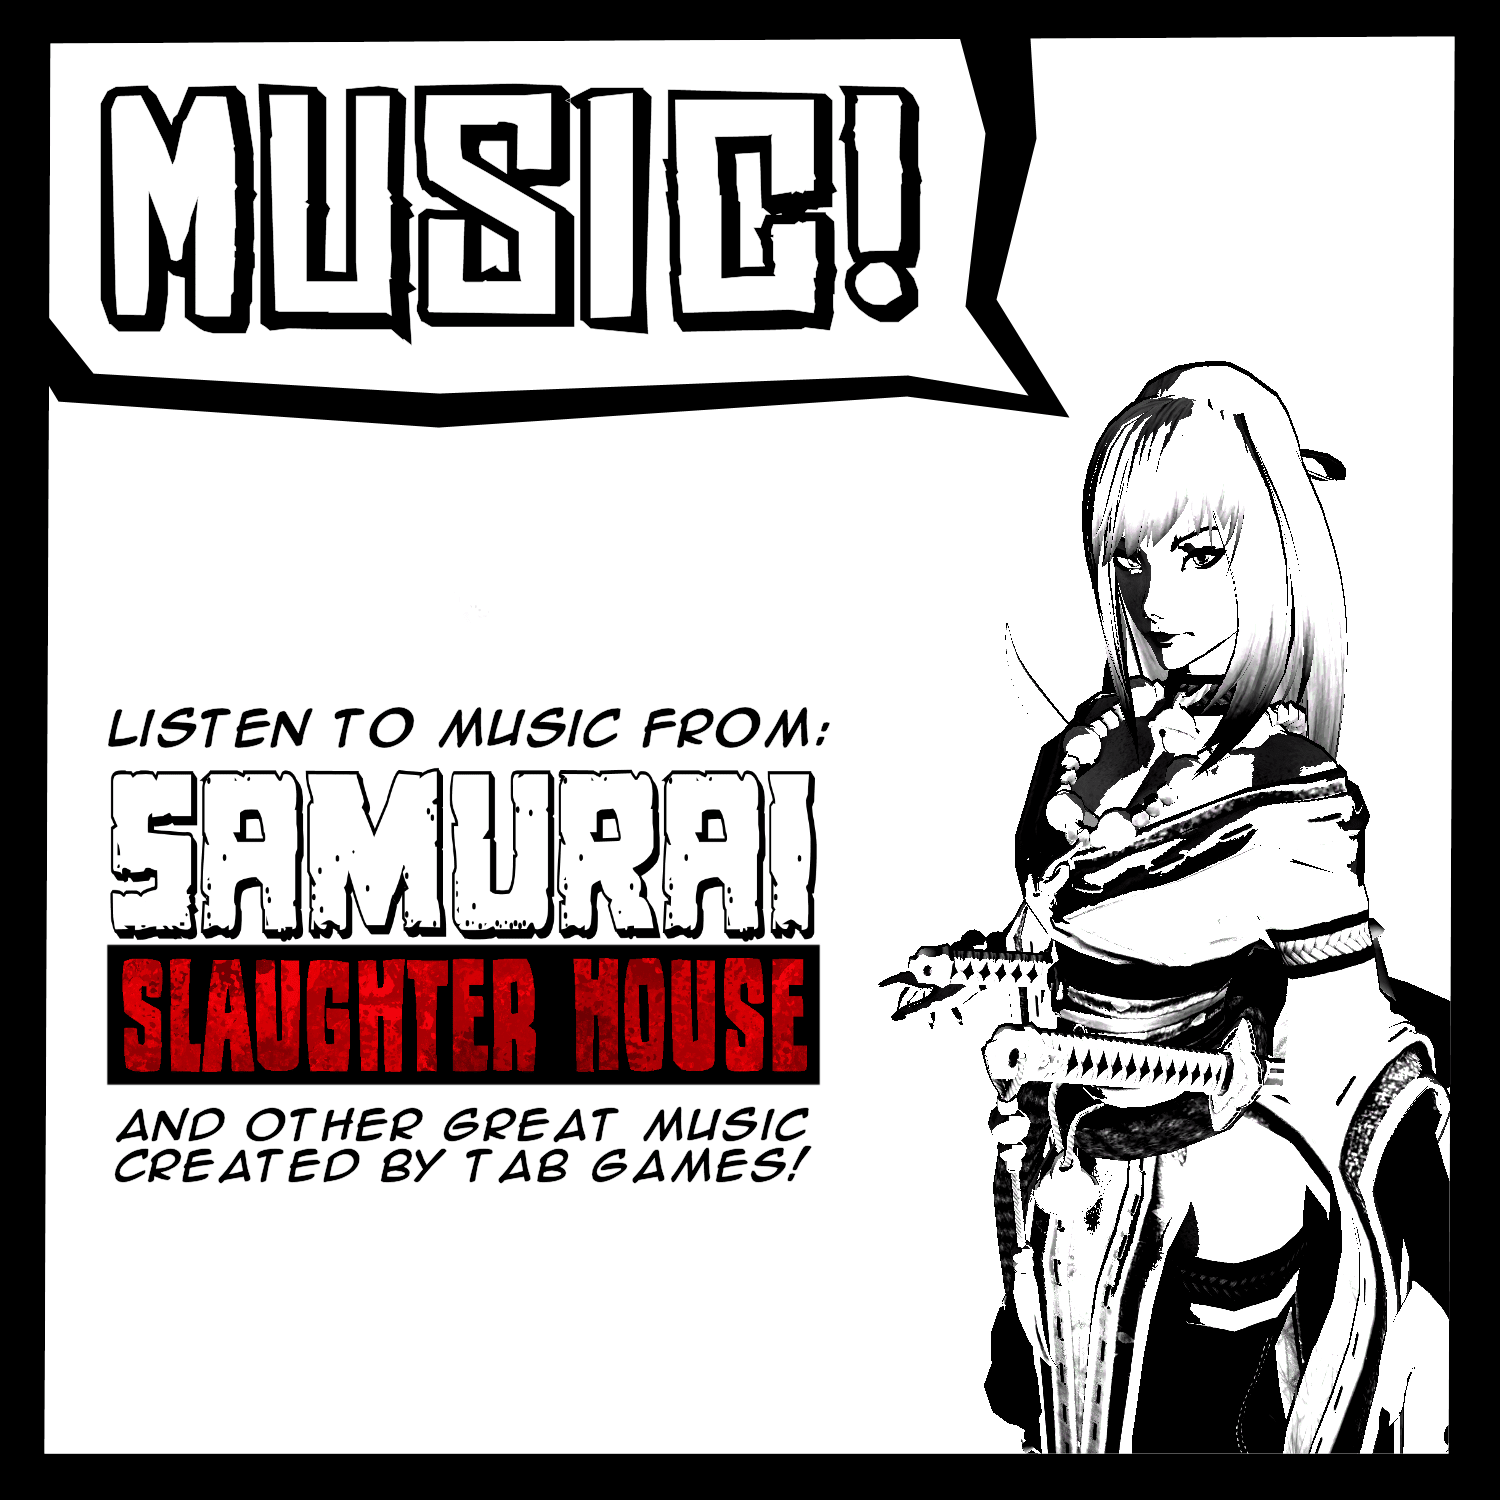 Listen to music from Samurai Slaughter House and other great songs created by the developer!